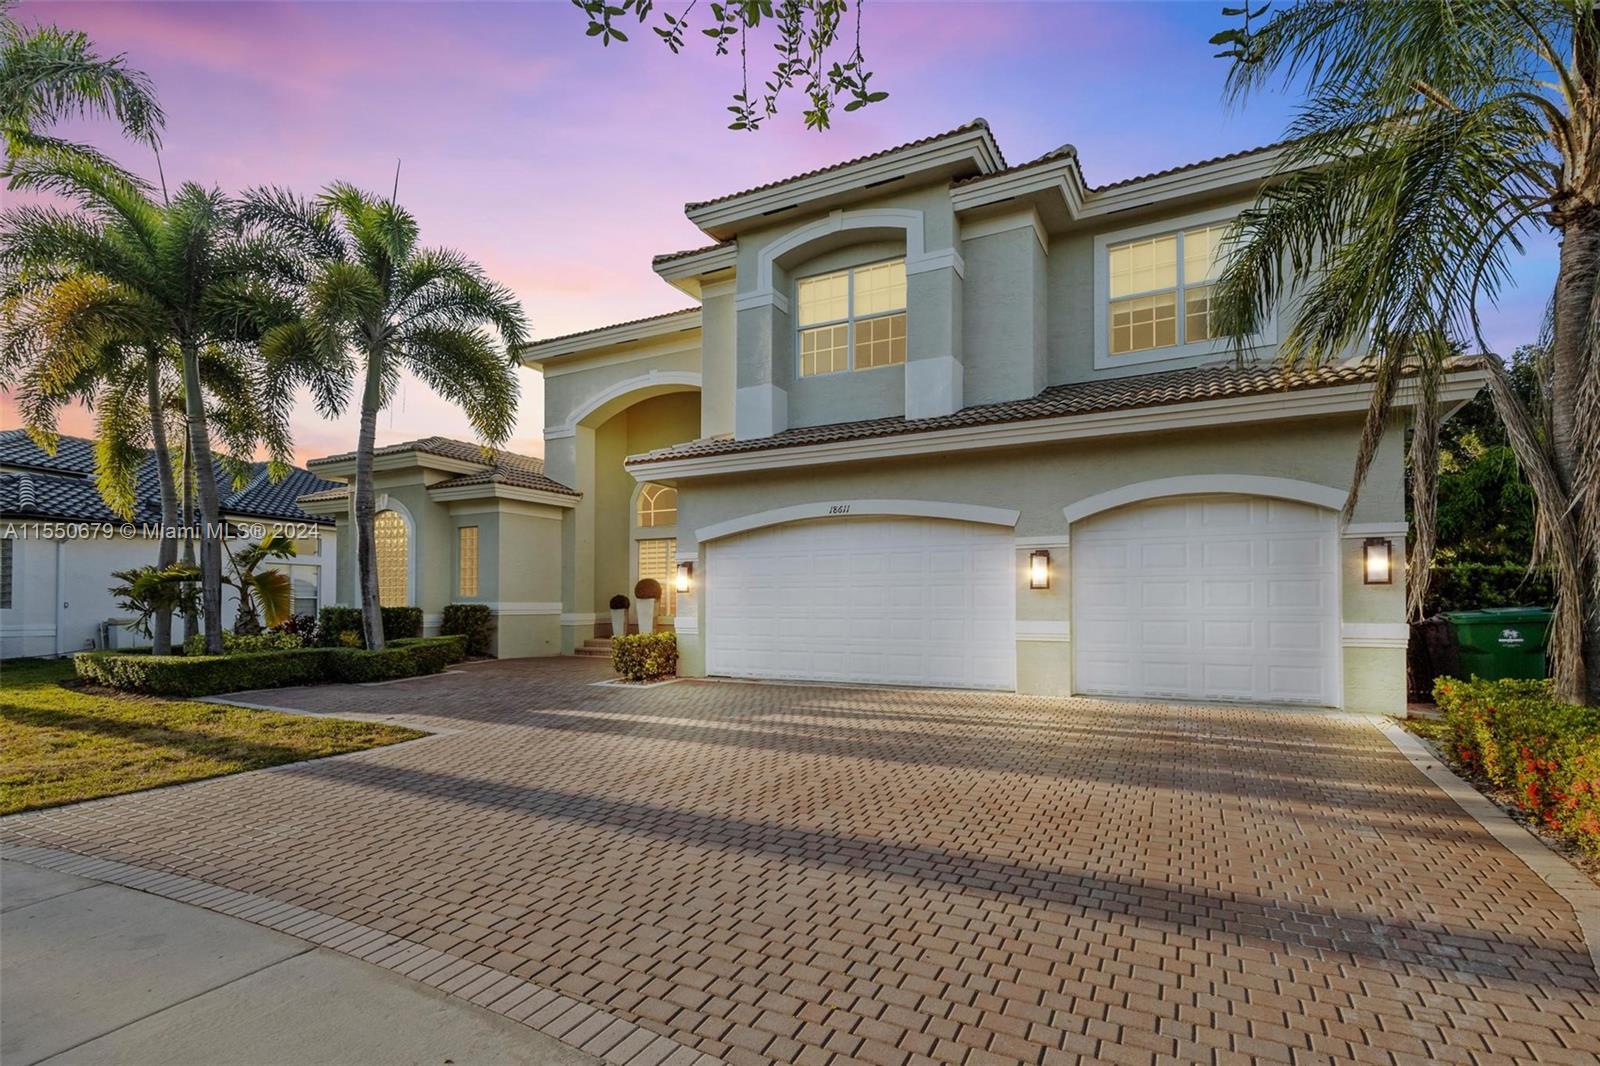 Miramar, FL, 33029 United States, 5 Bedrooms Bedrooms, ,4 BathroomsBathrooms,Residential,For Sale,A11550679